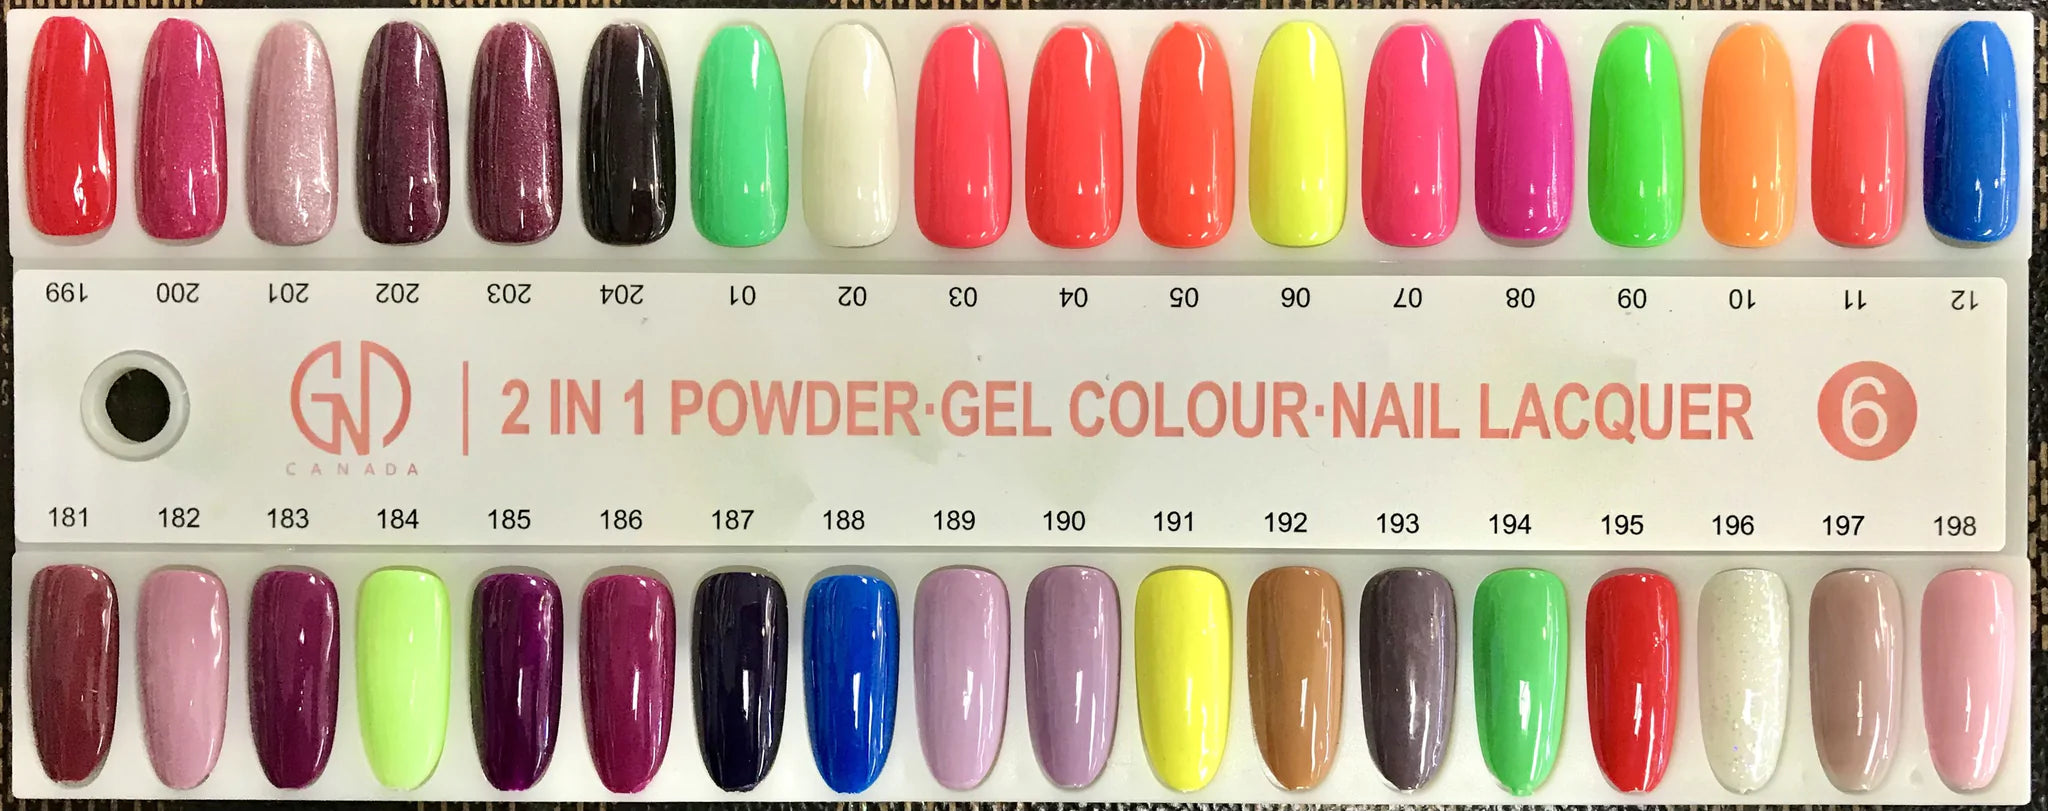 GND Duo Gel & Lacquer 183